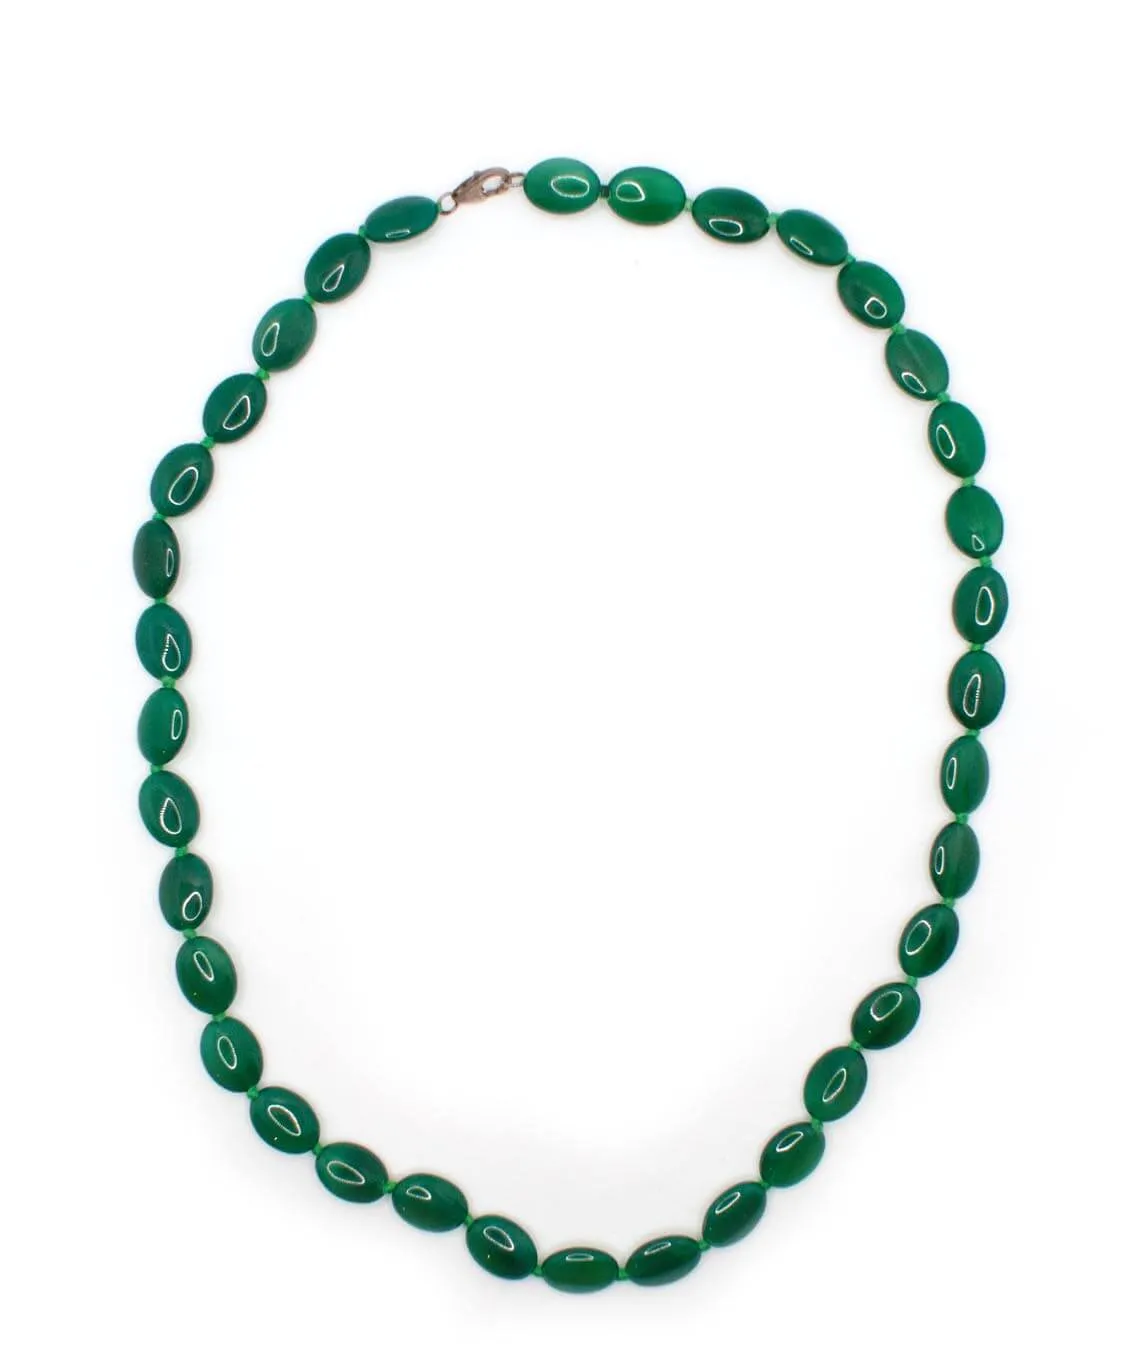 Vintage Art Deco green glass bead necklace